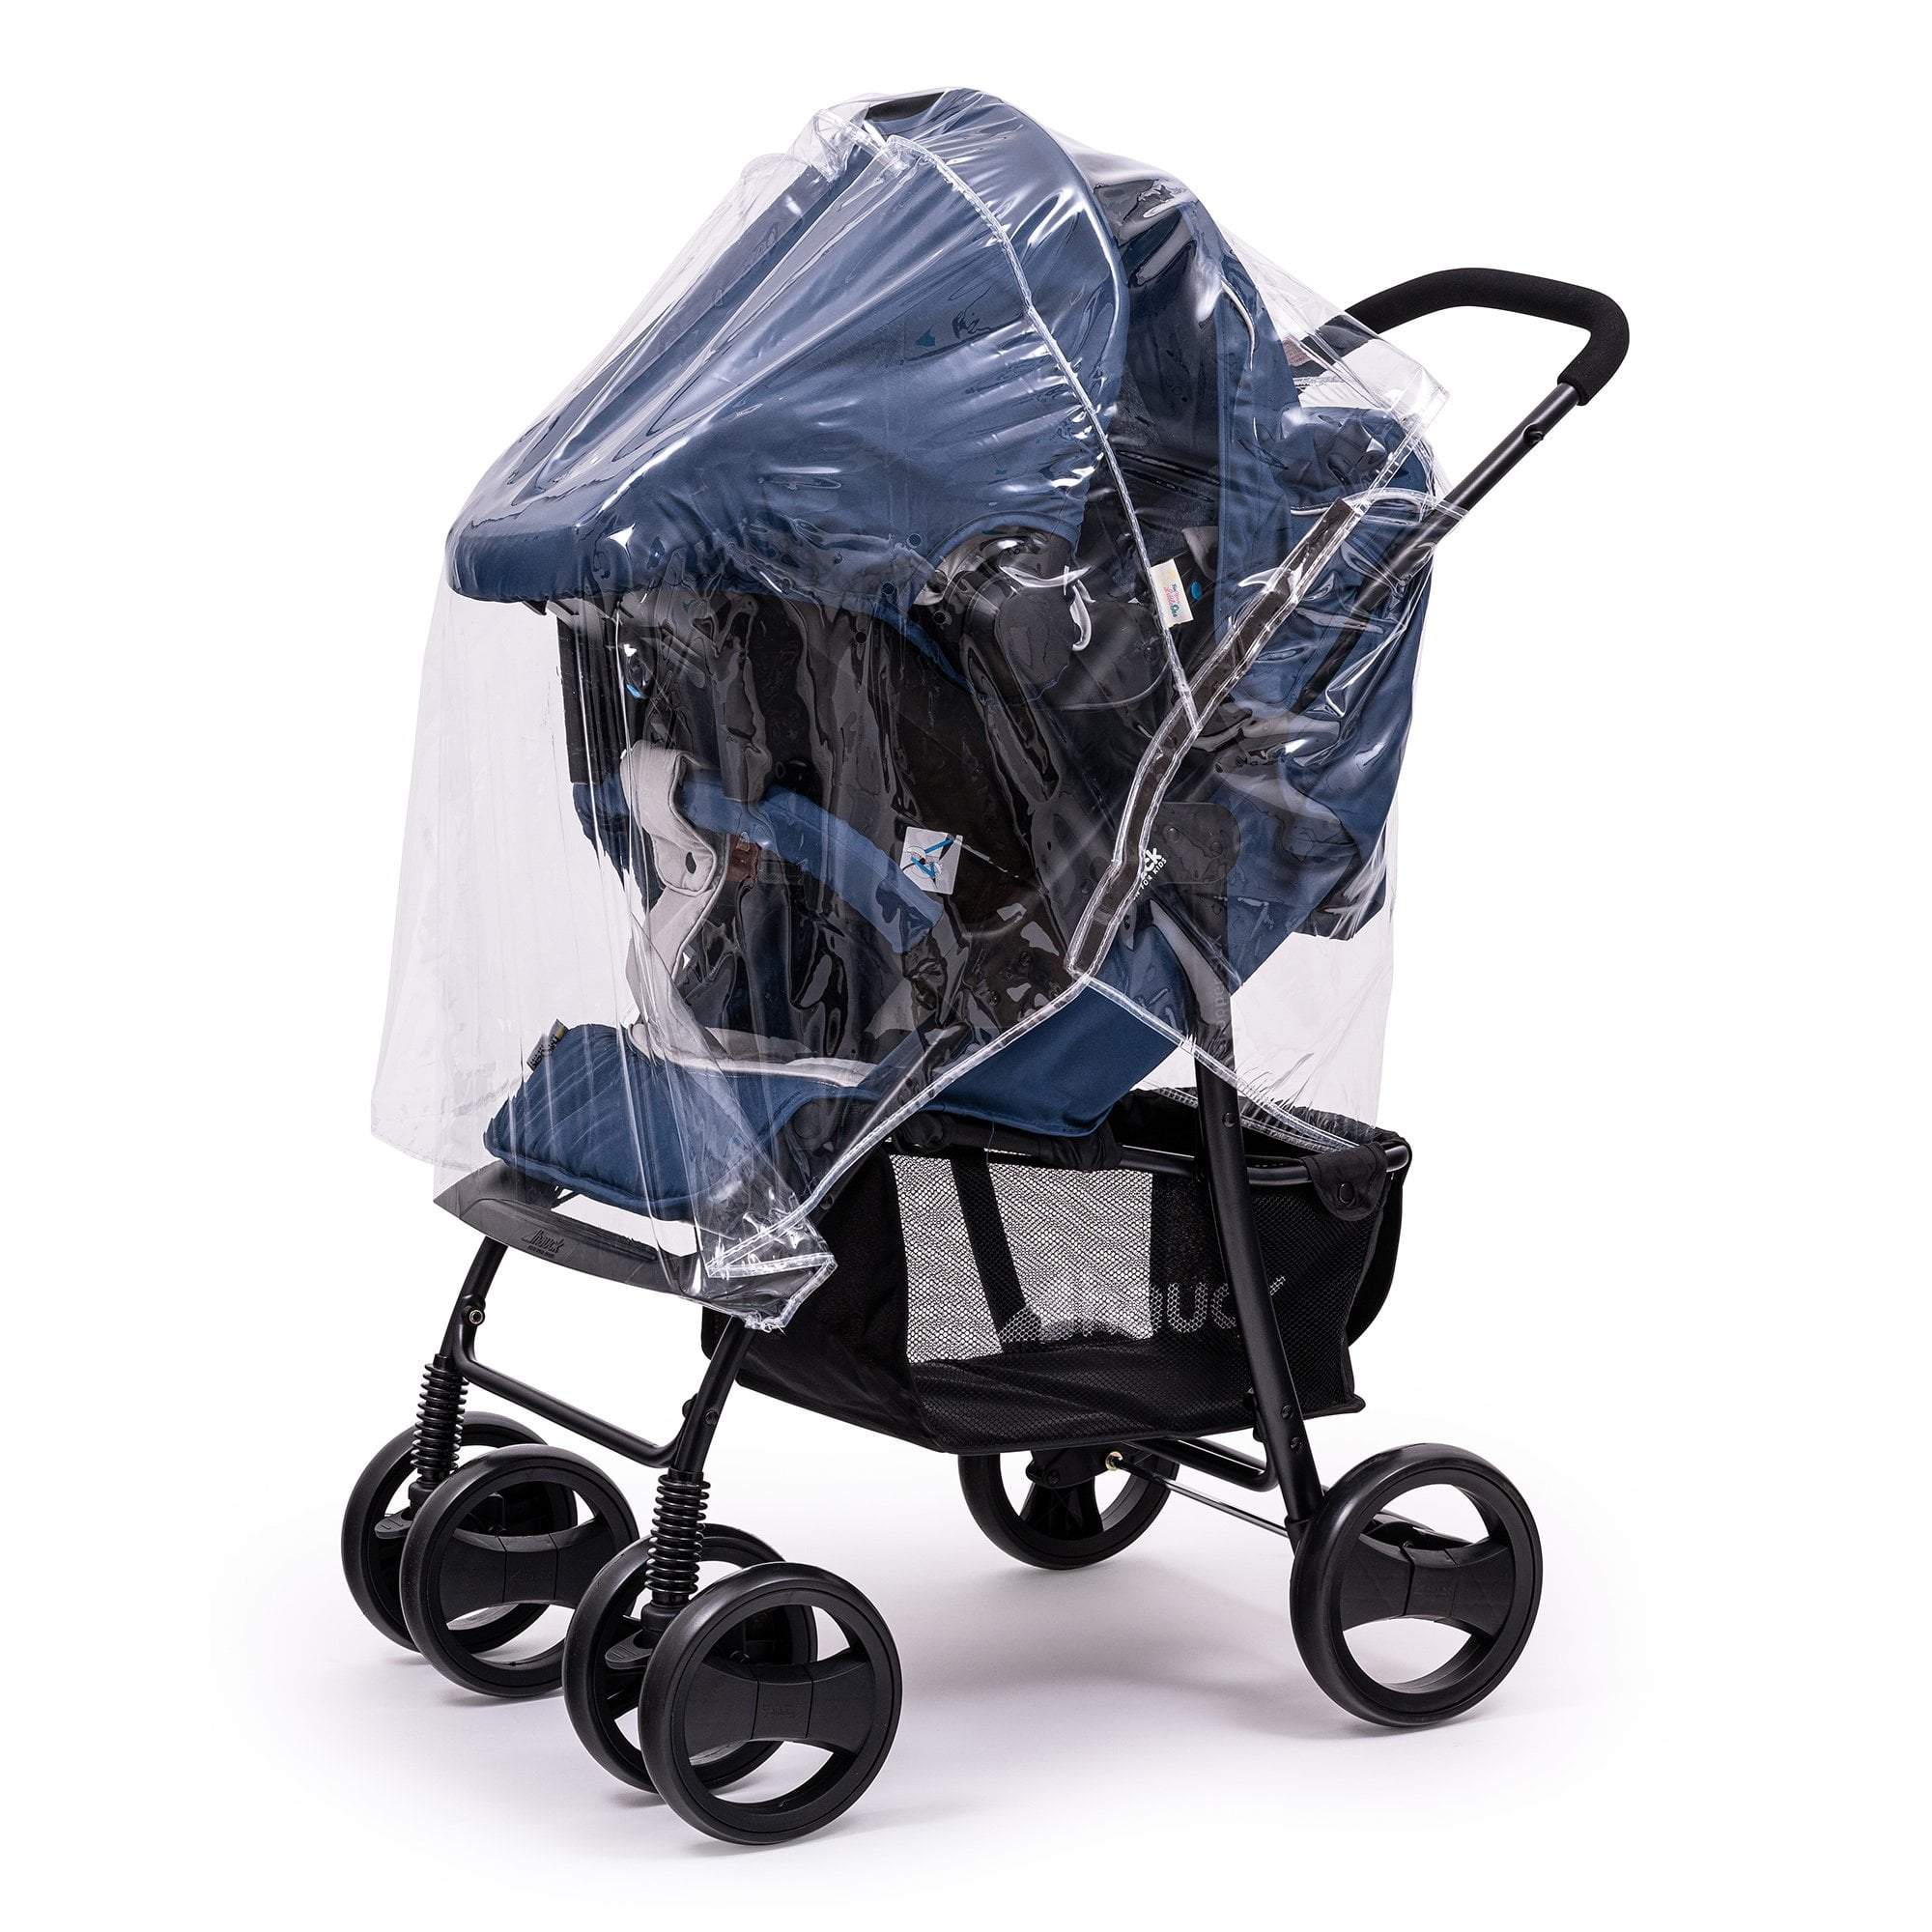 Travel System Raincover Compatible with Infababy - Fits All Models - For Your Little One